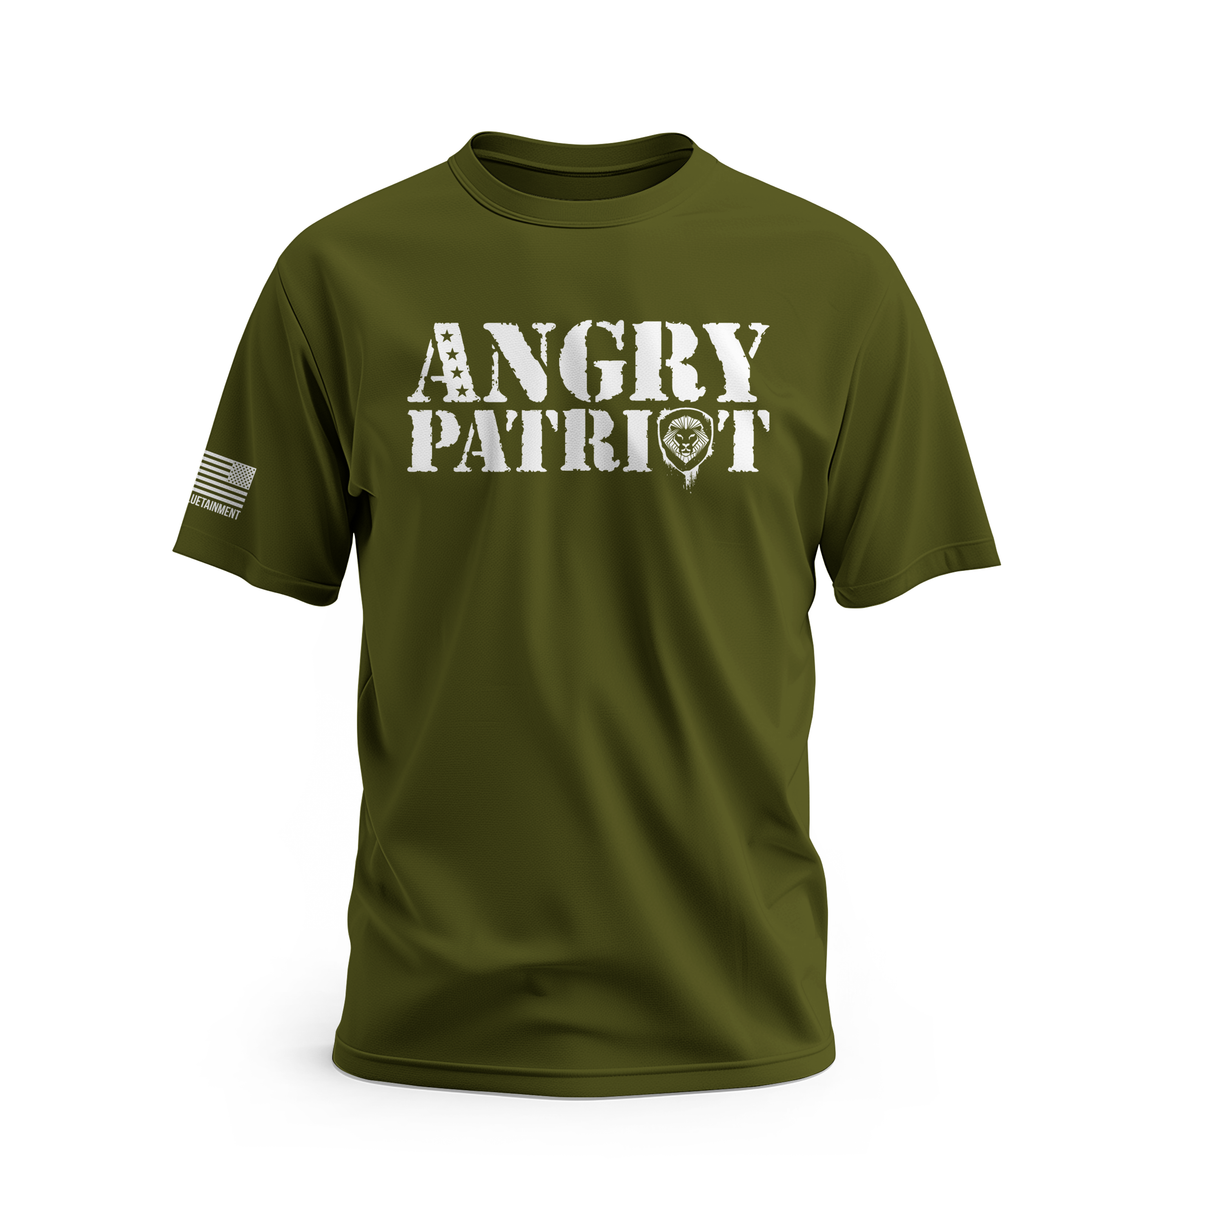 Angry Patriot Short-Sleeved T-Shirt